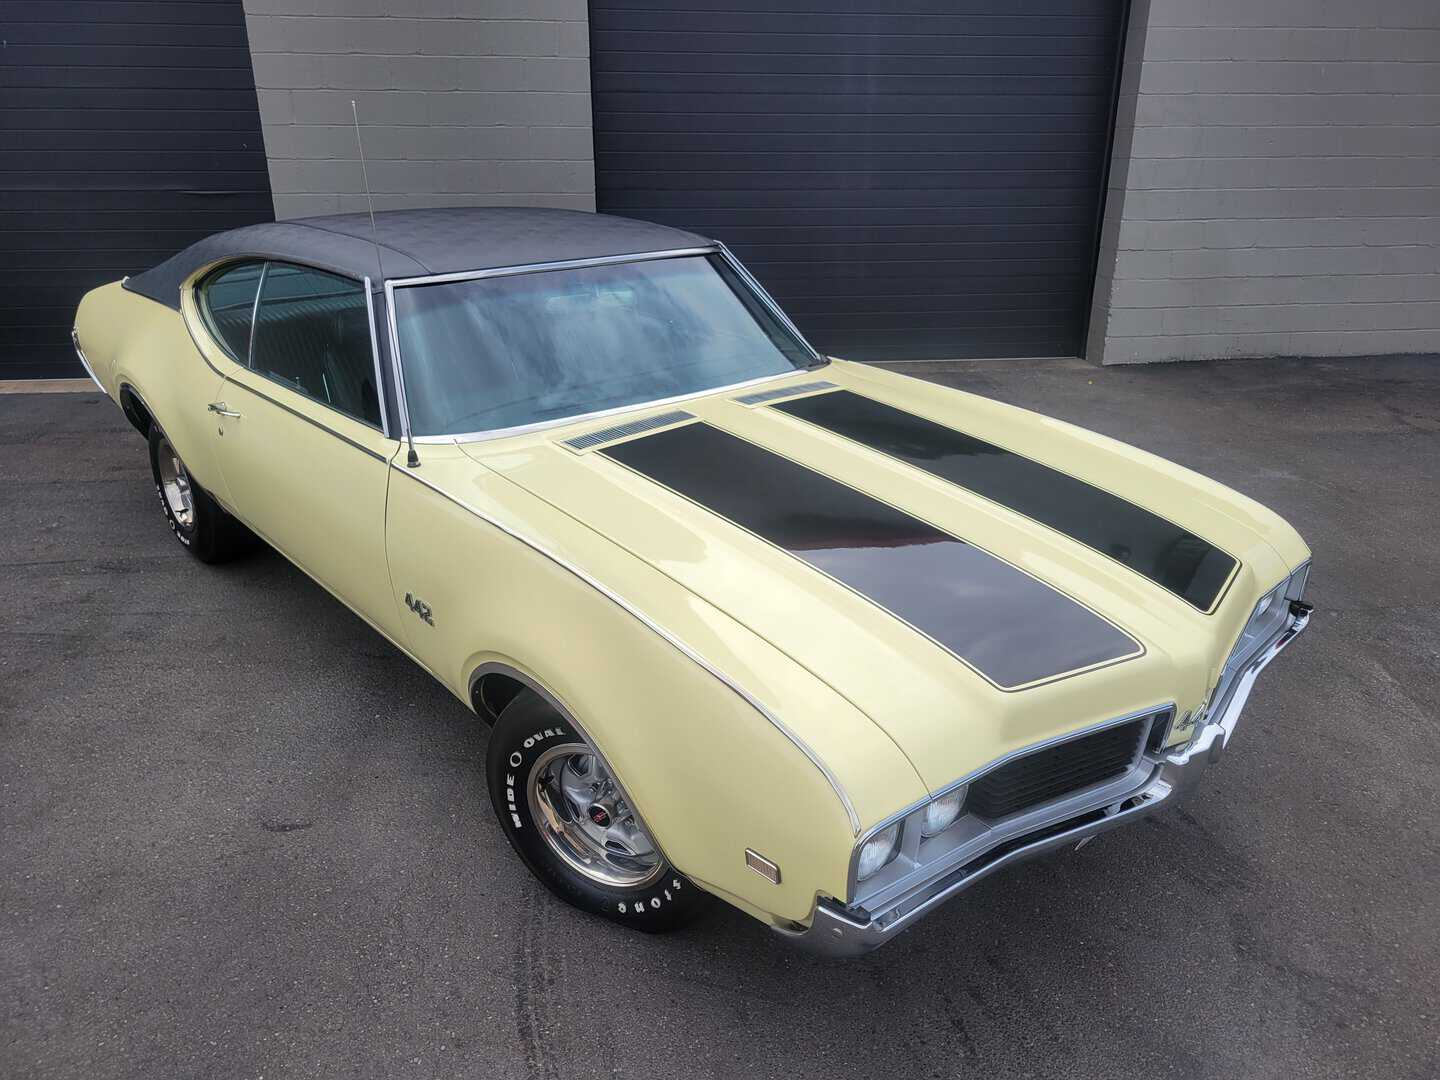 A 1969 Oldsmobile 442 muscle car is parked in front of a garage.